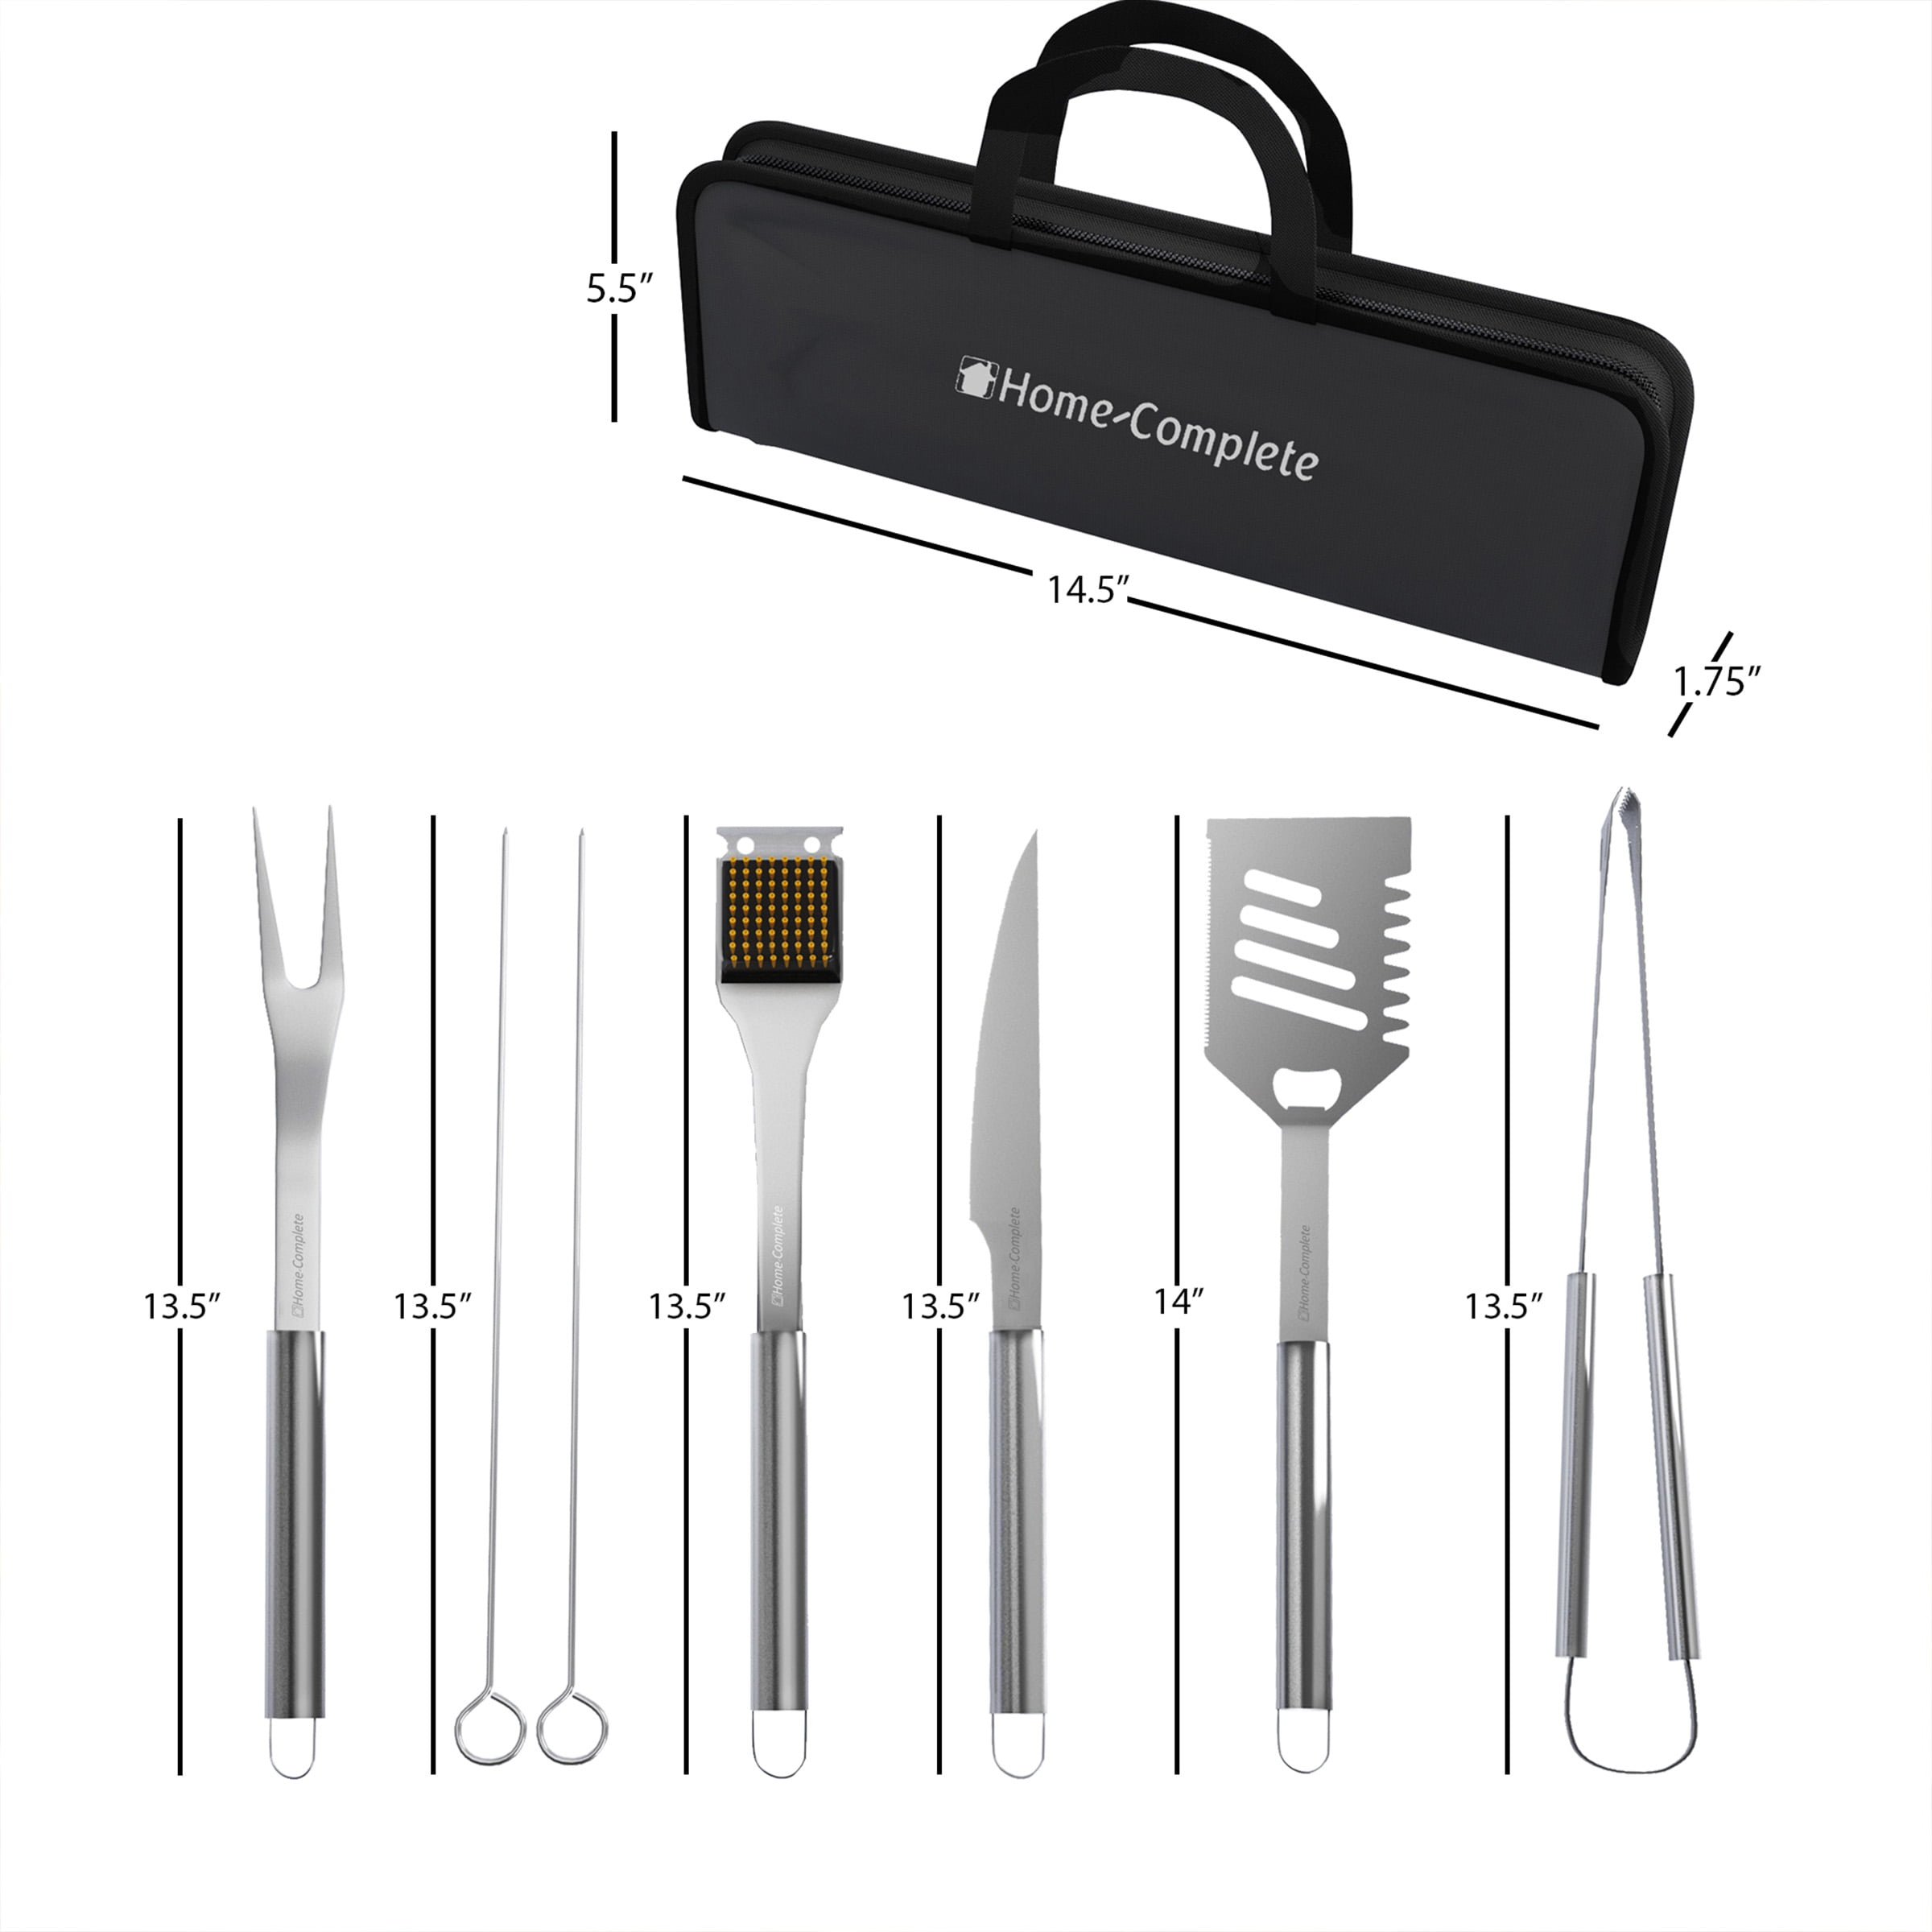 Barbecue Set, Grill Tools Set, Barbecue Grill Tool Set, Bbq Accessories For  Camping, Barbecue Skewers, Tongs, Oil Brush, Bbq Forks, Cleaning Brush,  Spatula, Knife, Meat Hammer, Storage Bag, Kitchen Supplices, Camping  Supplies 